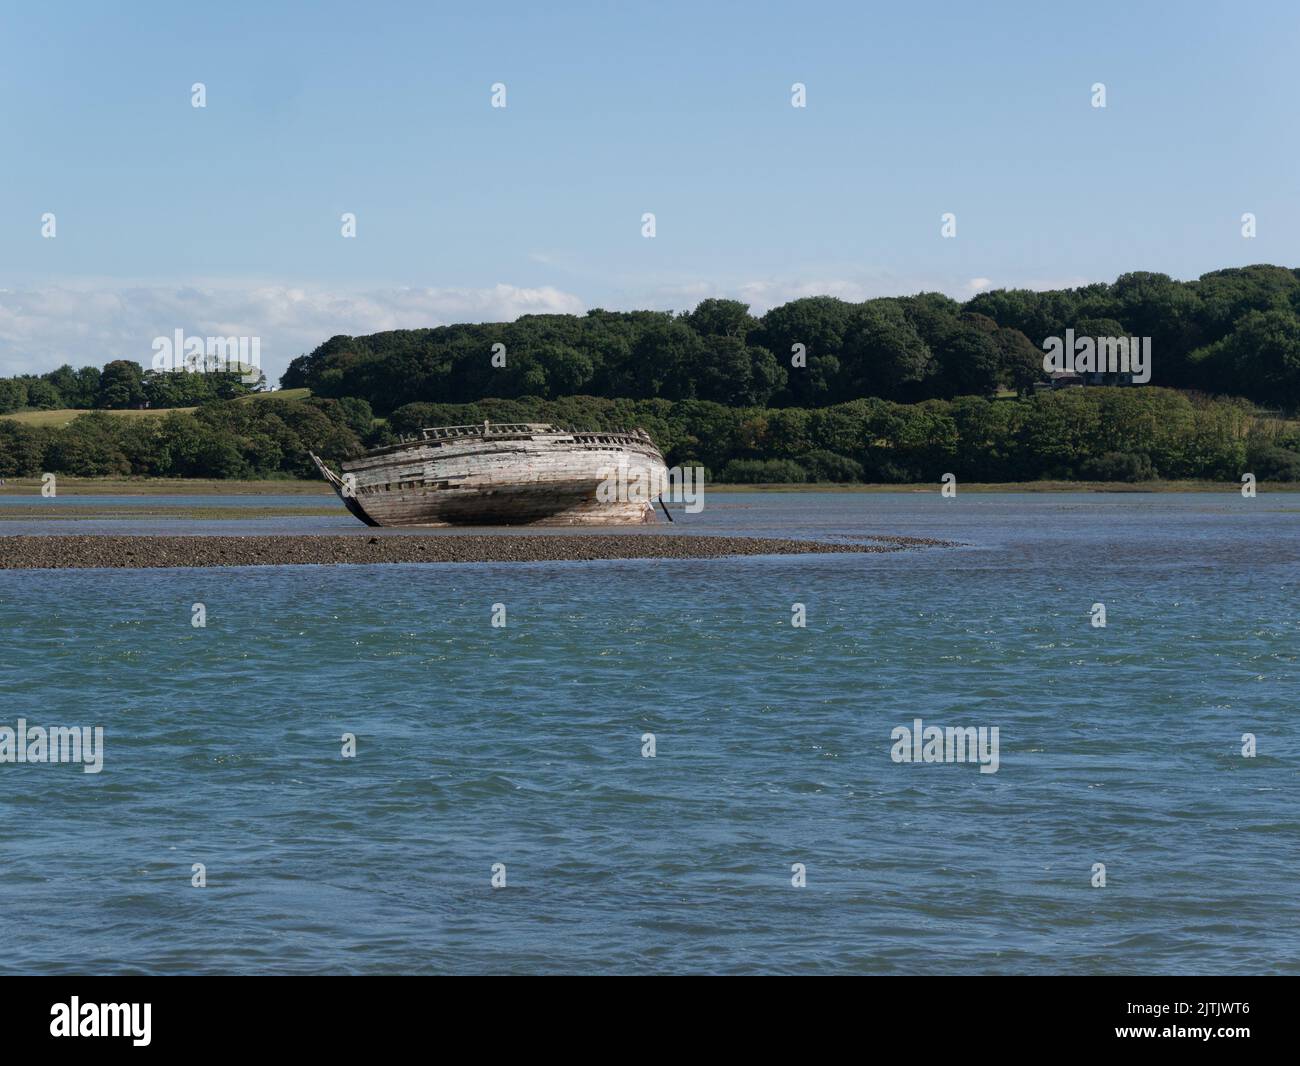 Abandoned wooden fishing boat on a sandbank in Traeth Dulas estuary Isle of Anglesey North Wales UK on a lovely August day with blue sky Stock Photo